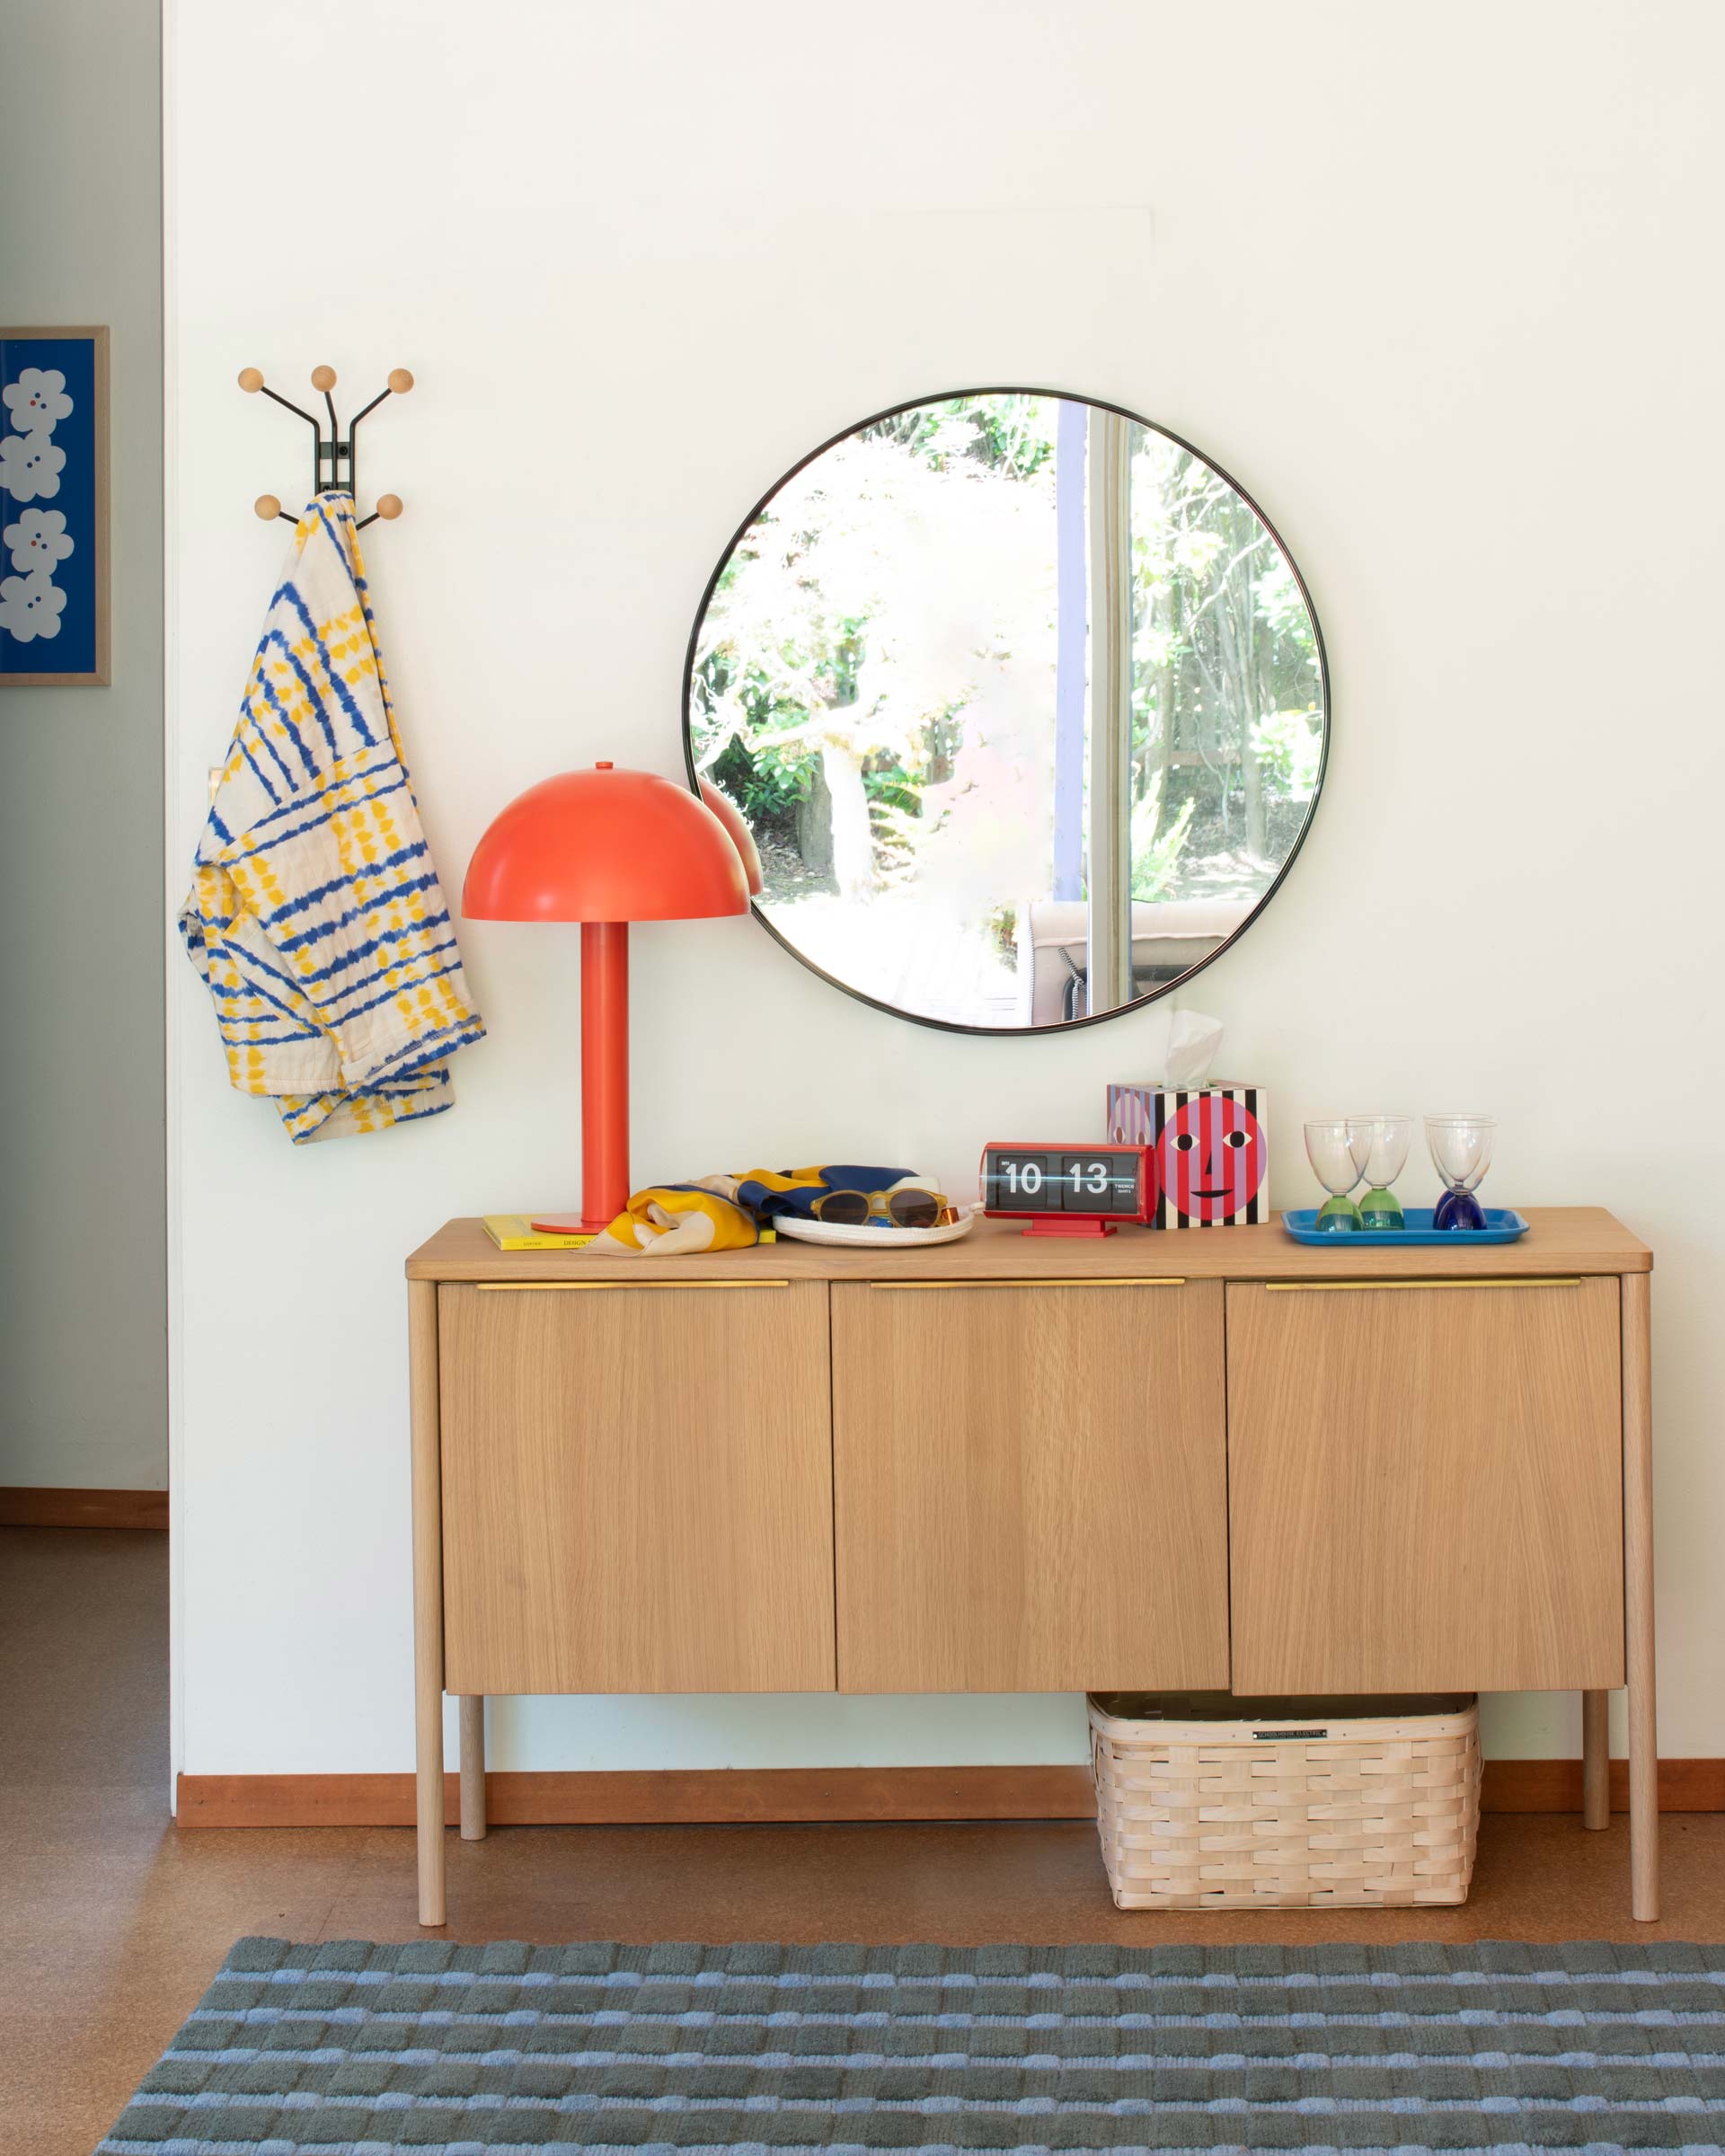 The Sidnie Lamp in persimmon on a sideboard.